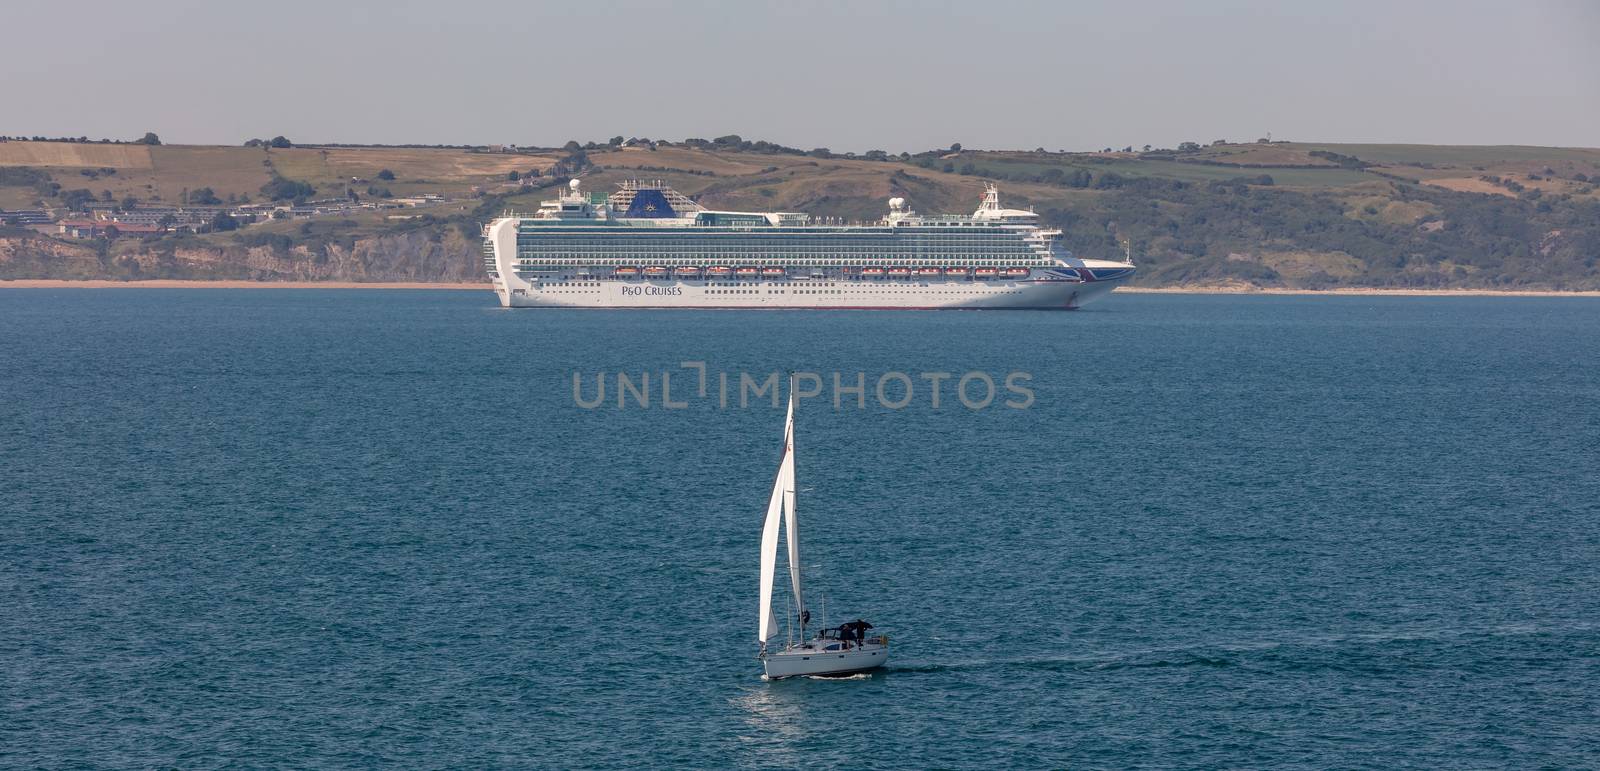 Weymouth Bay, United Kingdom - June 25, 2020: Beautiful panoramic shot of P&O cruise ship Ventura anchored in Weymouth Bay. Sail boat moving in the foreground.